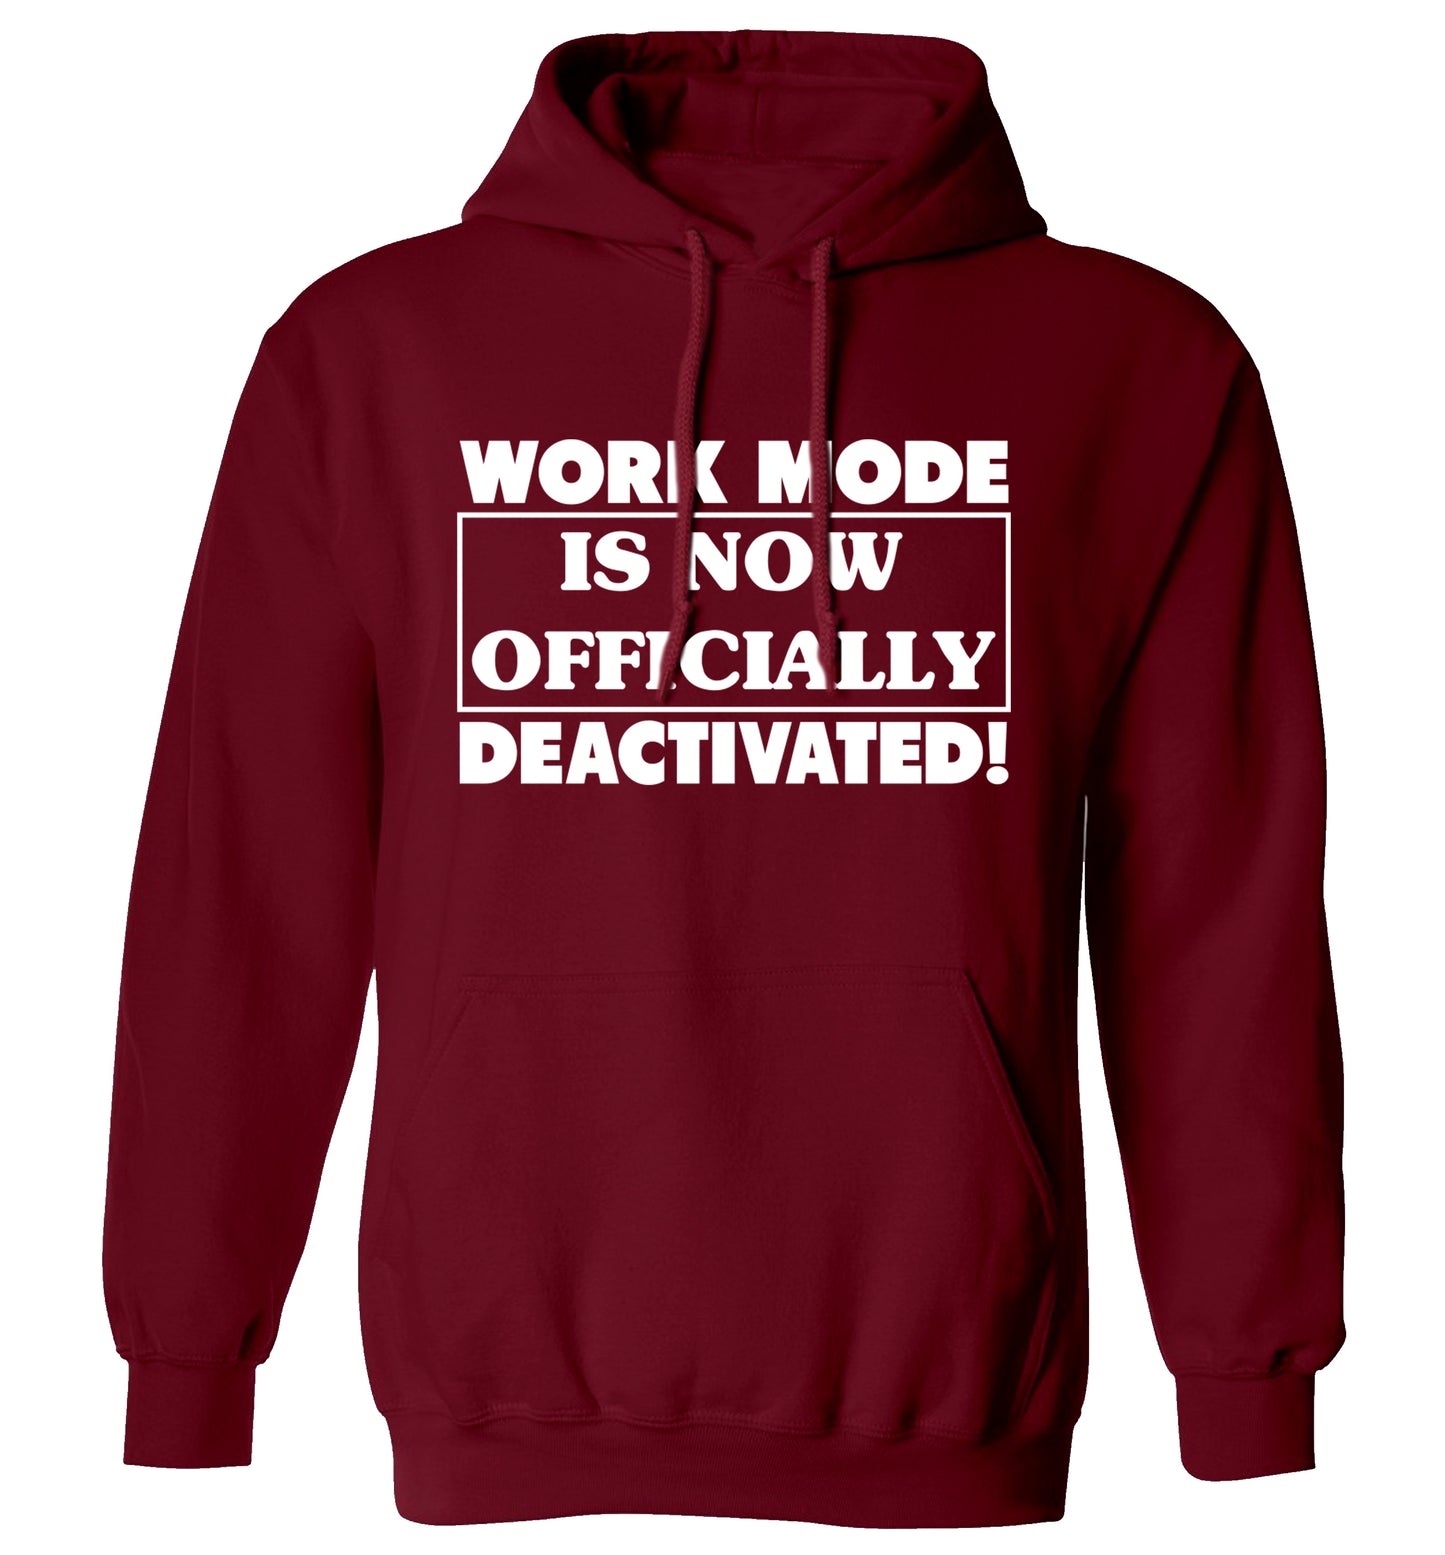 Work mode is now officially deactivated adults unisex maroon hoodie 2XL